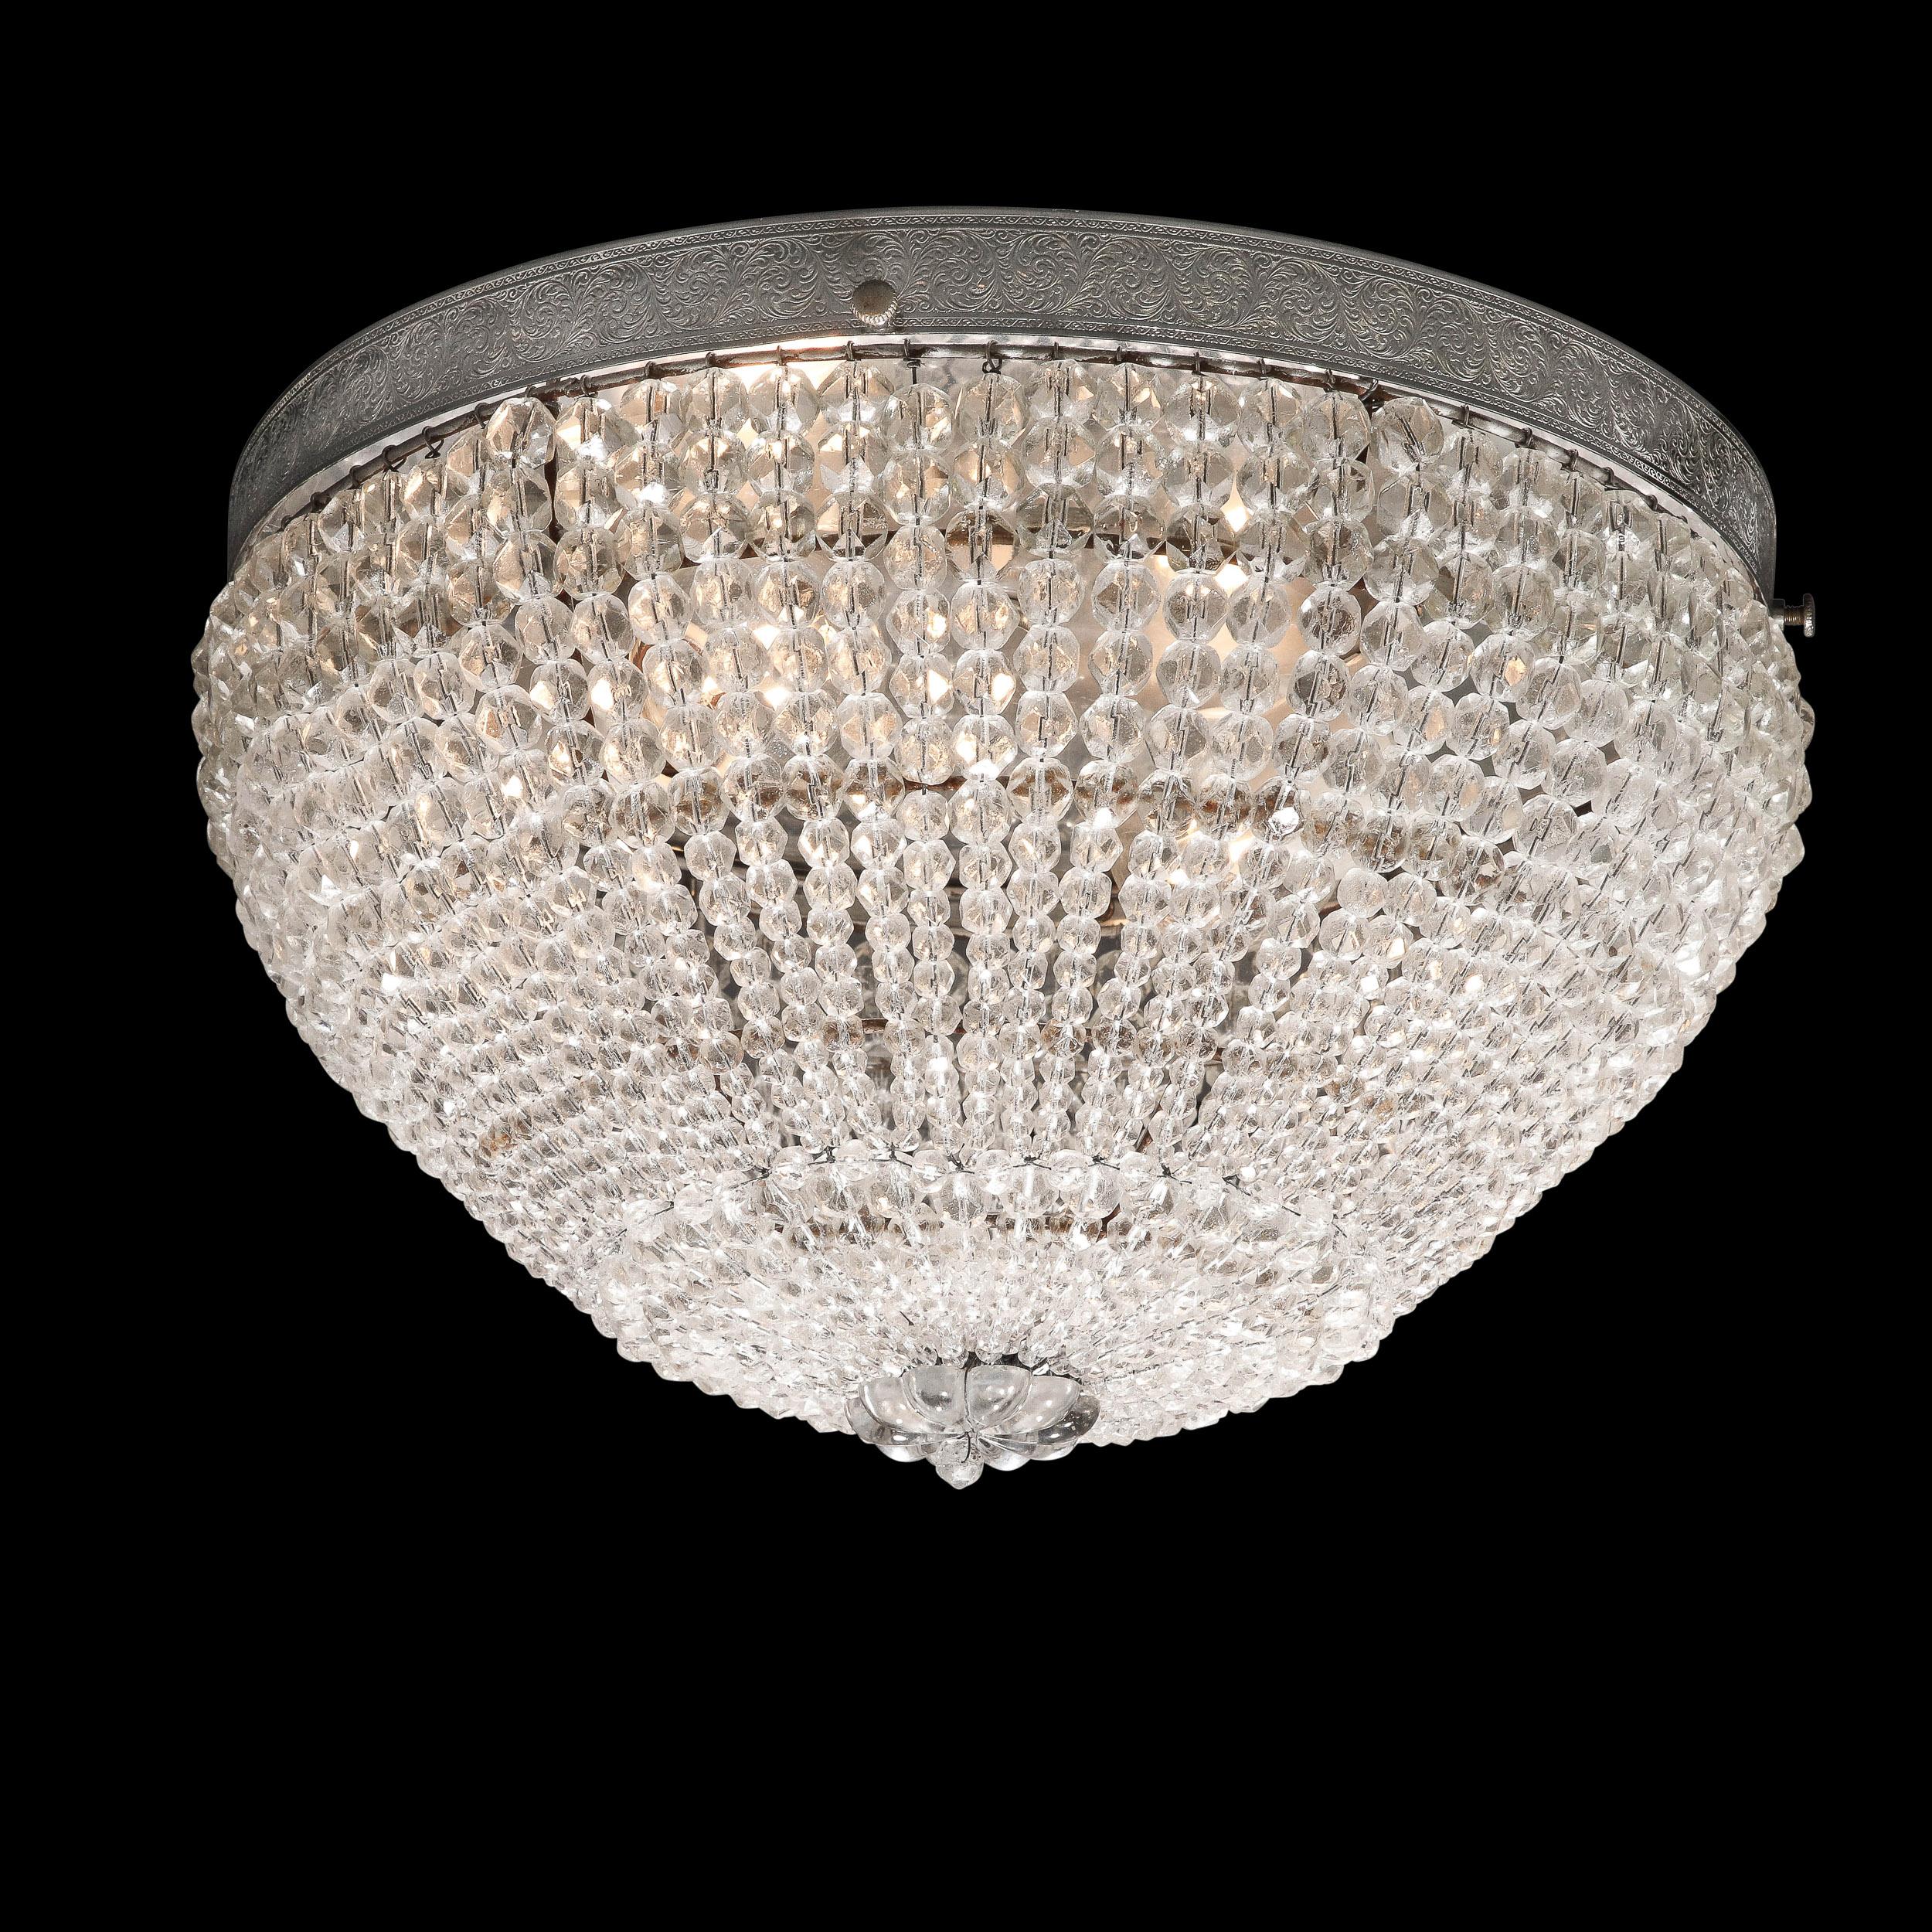 Hollywood Regency Beaded Crystal Flush Mount Chandelier With Silvered Fittings For Sale 4